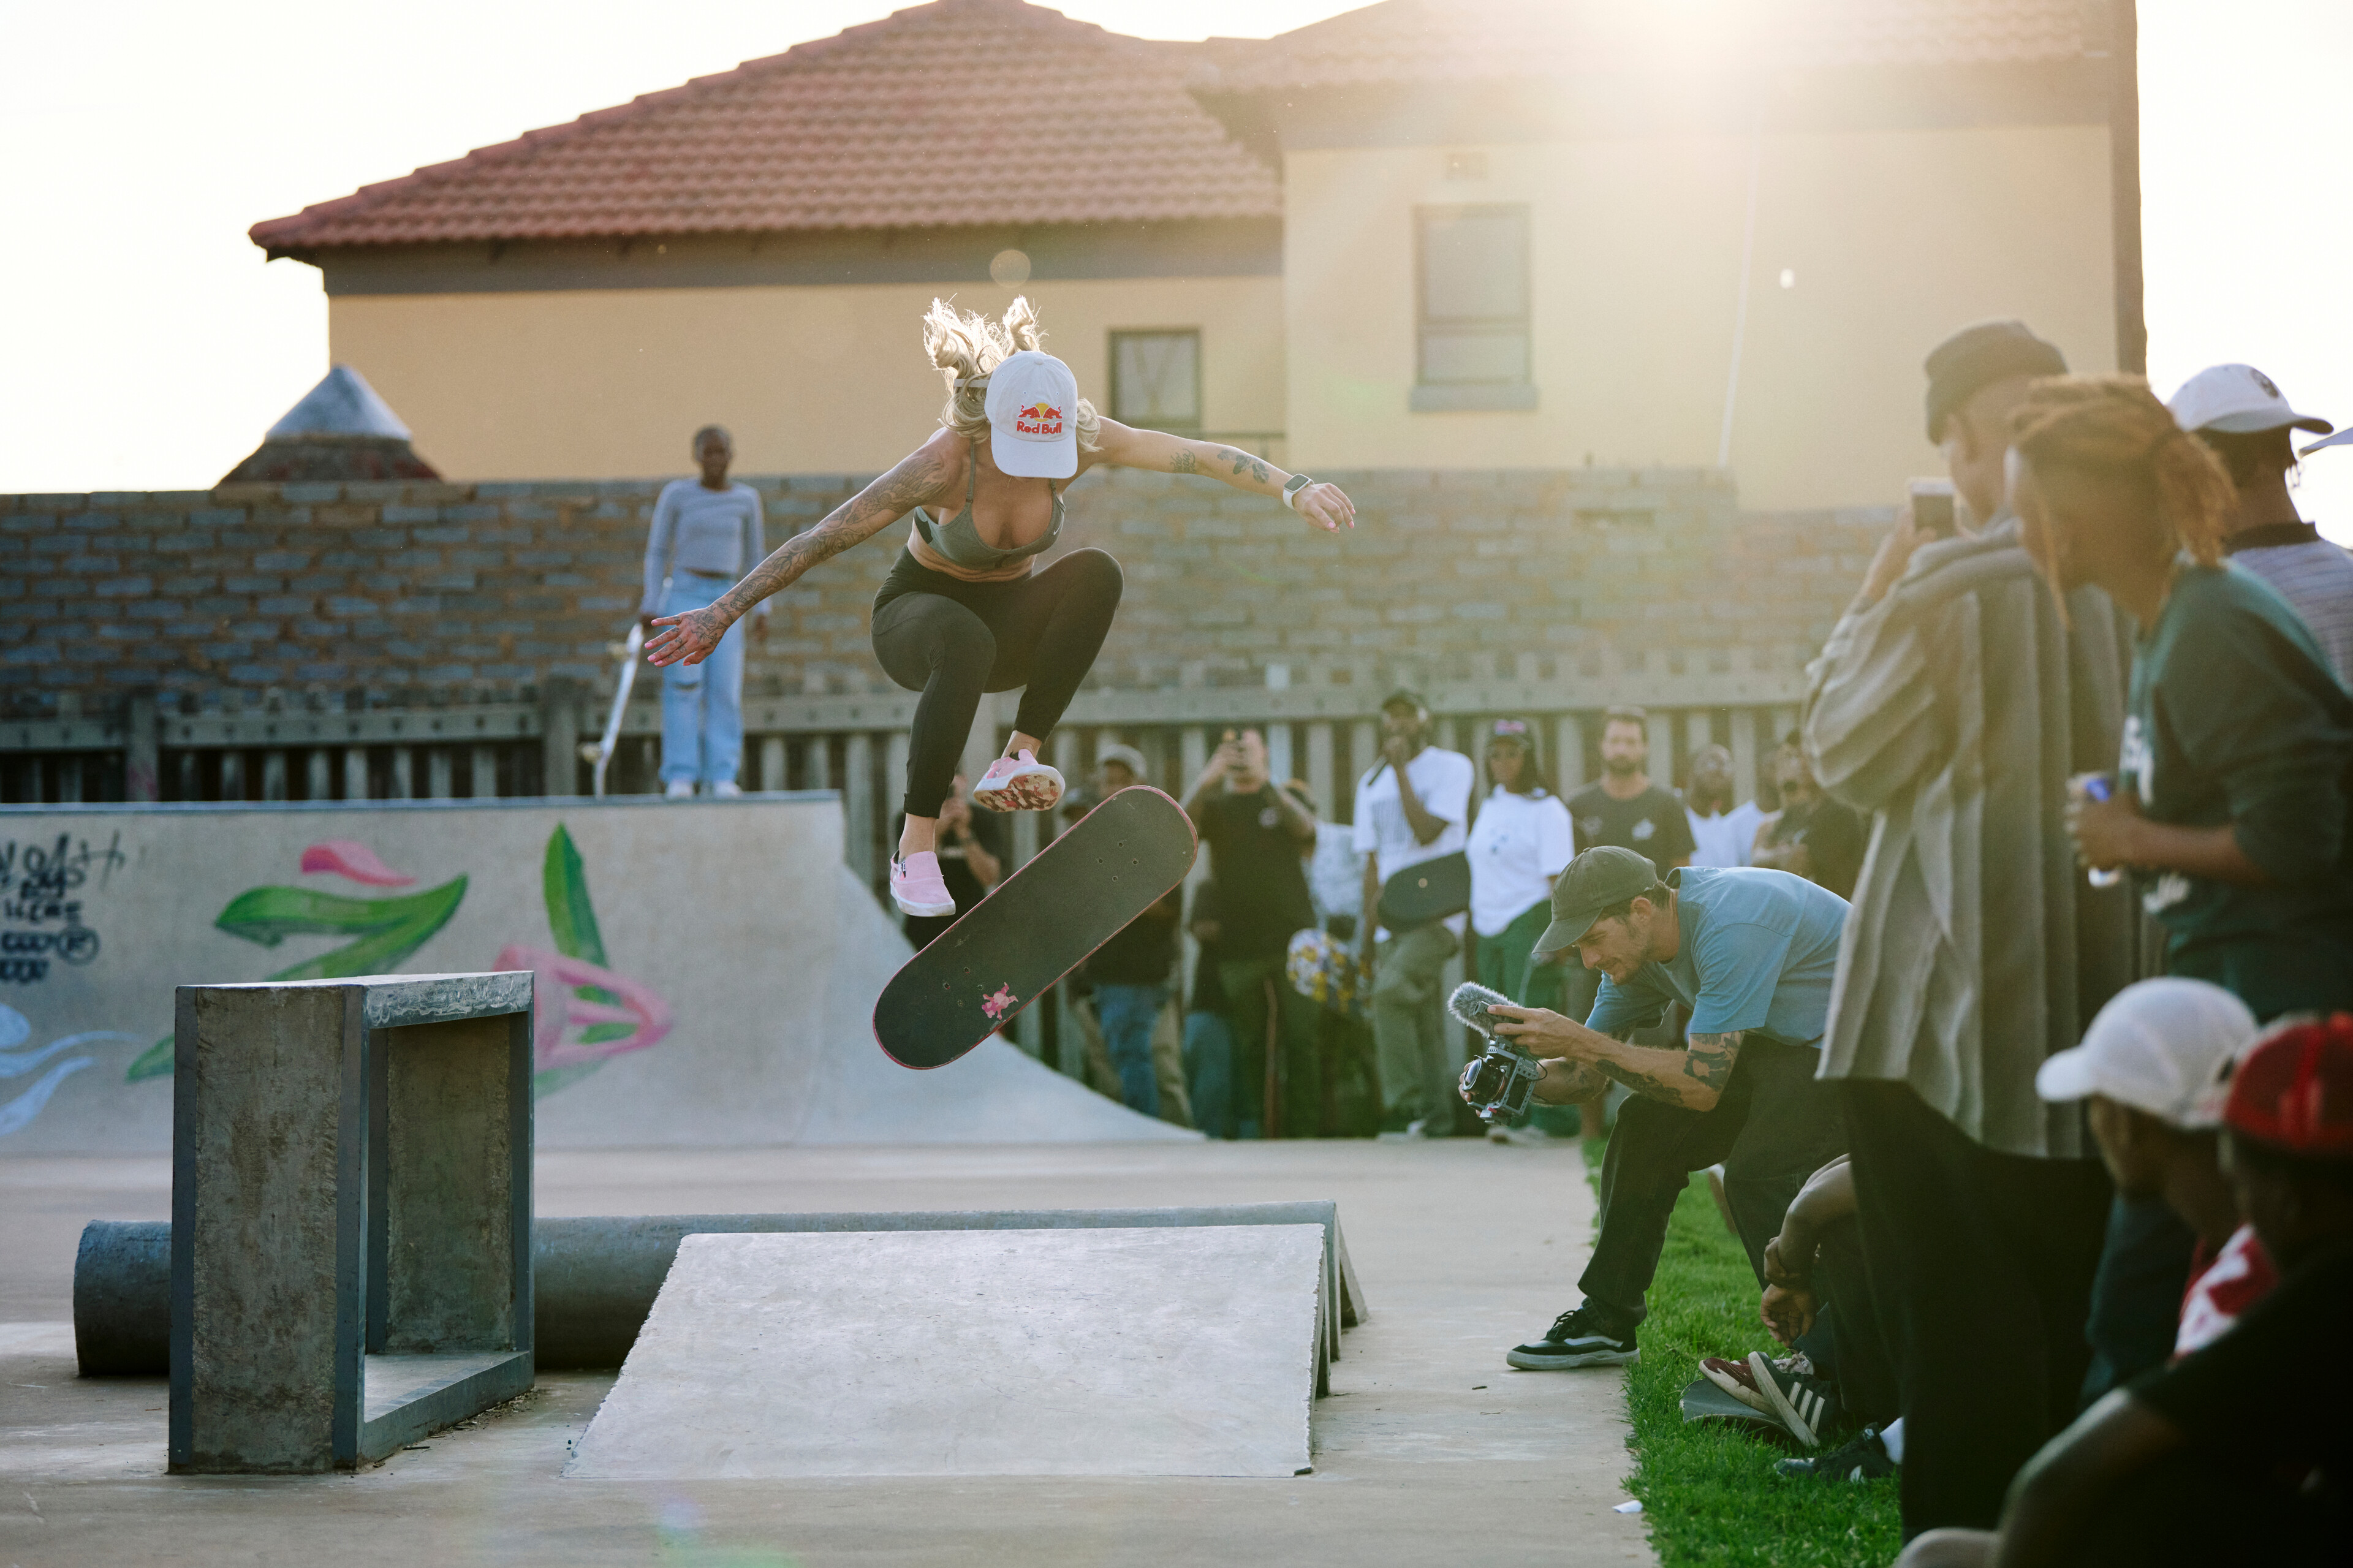 Leticia Bufoni performs during Leticia Pushes Mzansi in Johannesburg, South Africa on March 1, 2023 // Tyrone Bradley / Red Bull Content Pool // SI202303072236 // Usage for editorial use only //